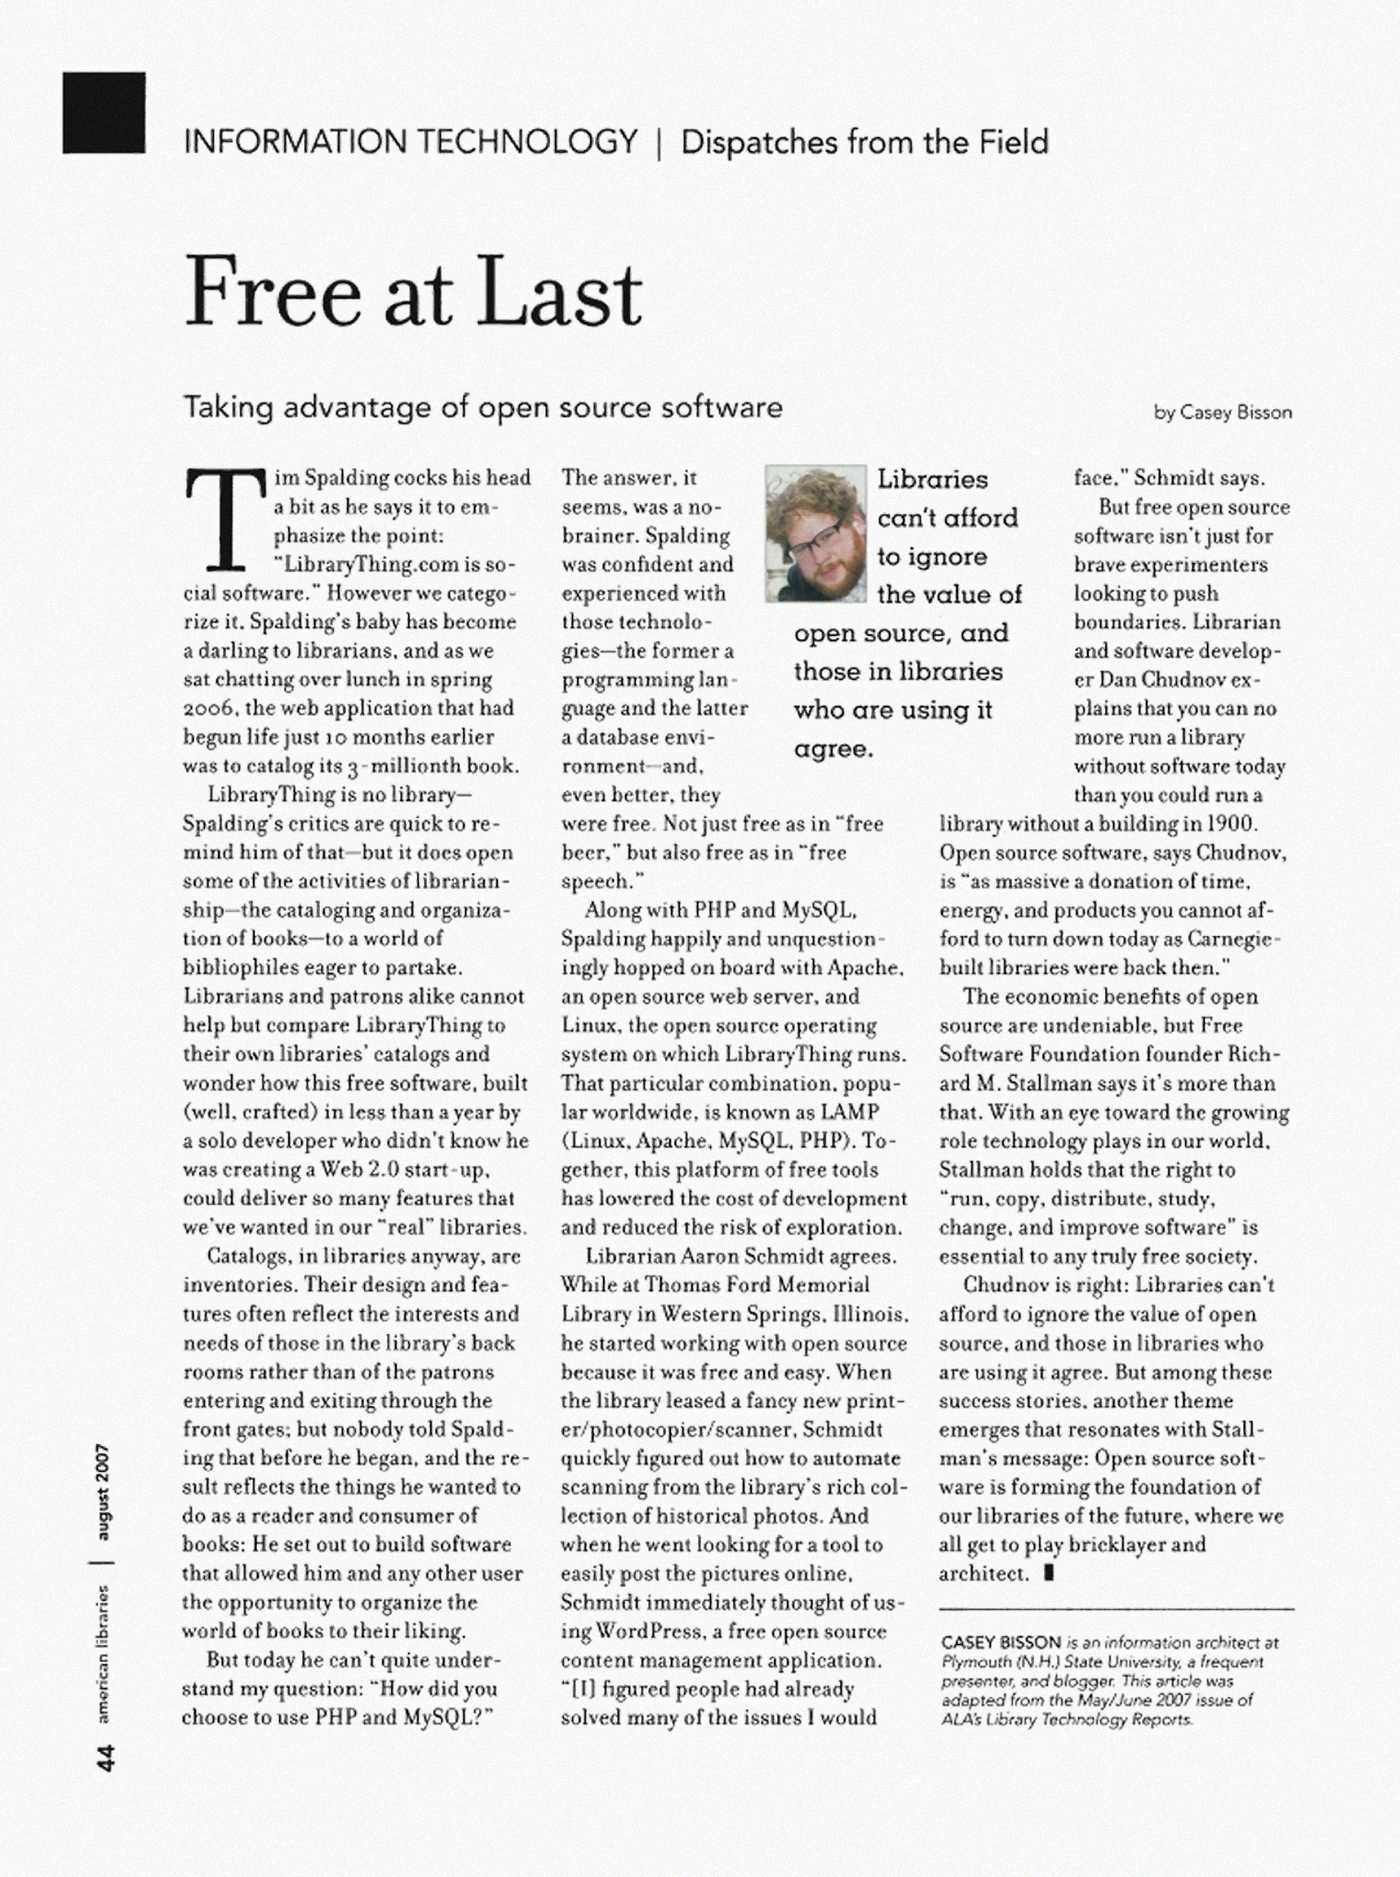 A scan of the article as it appeared in the August 2007 issue of American Libraries.